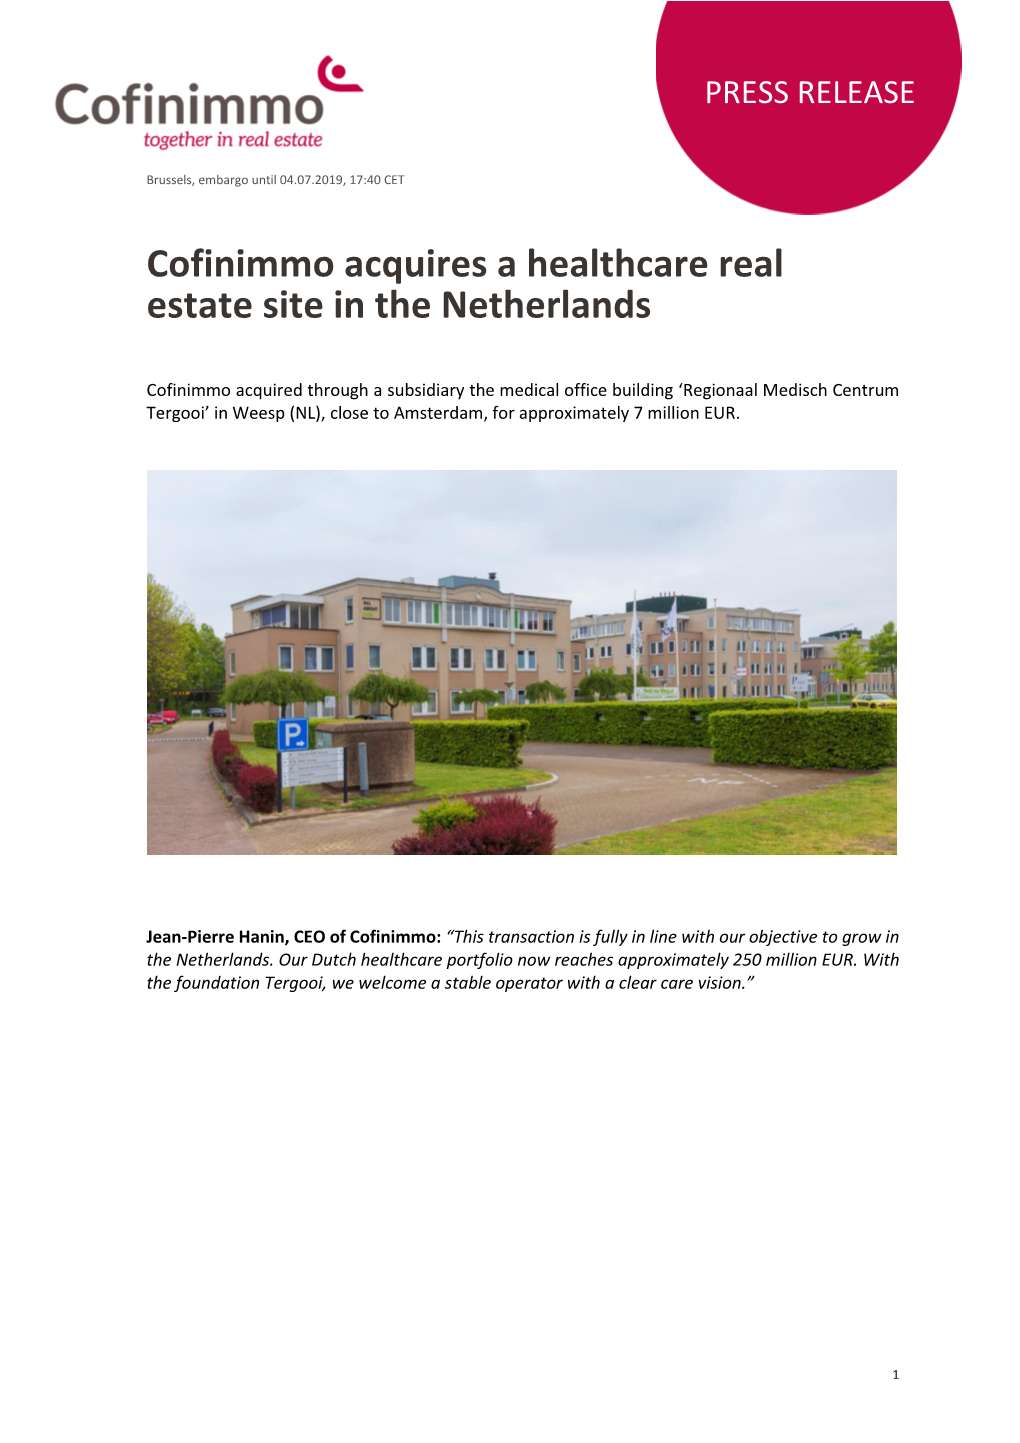 Cofinimmo Acquires a Healthcare Real Estate Site in the Netherlands